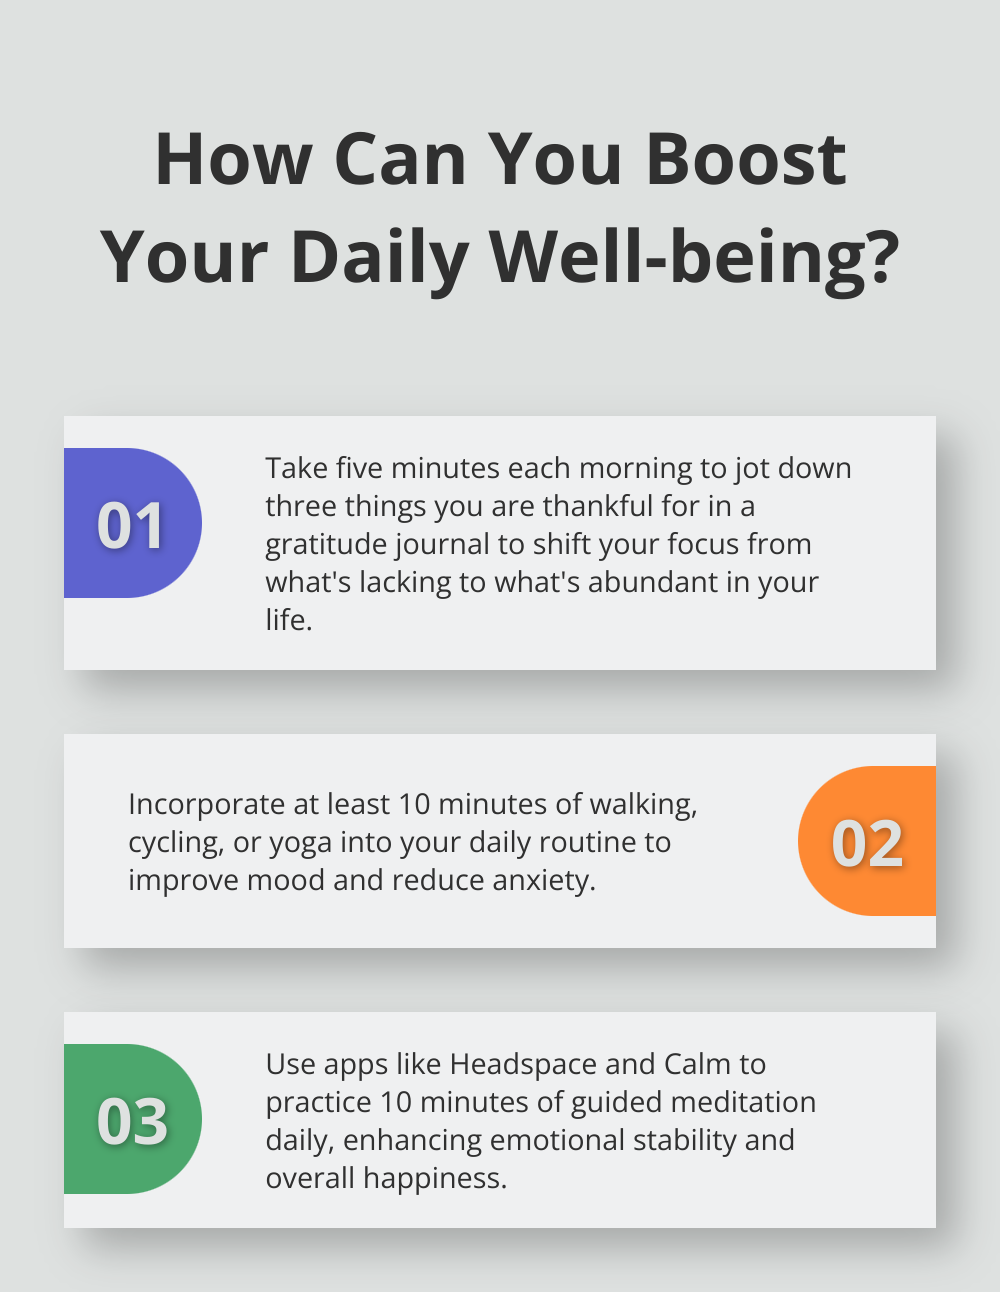 Fact - How Can You Boost Your Daily Well-being?